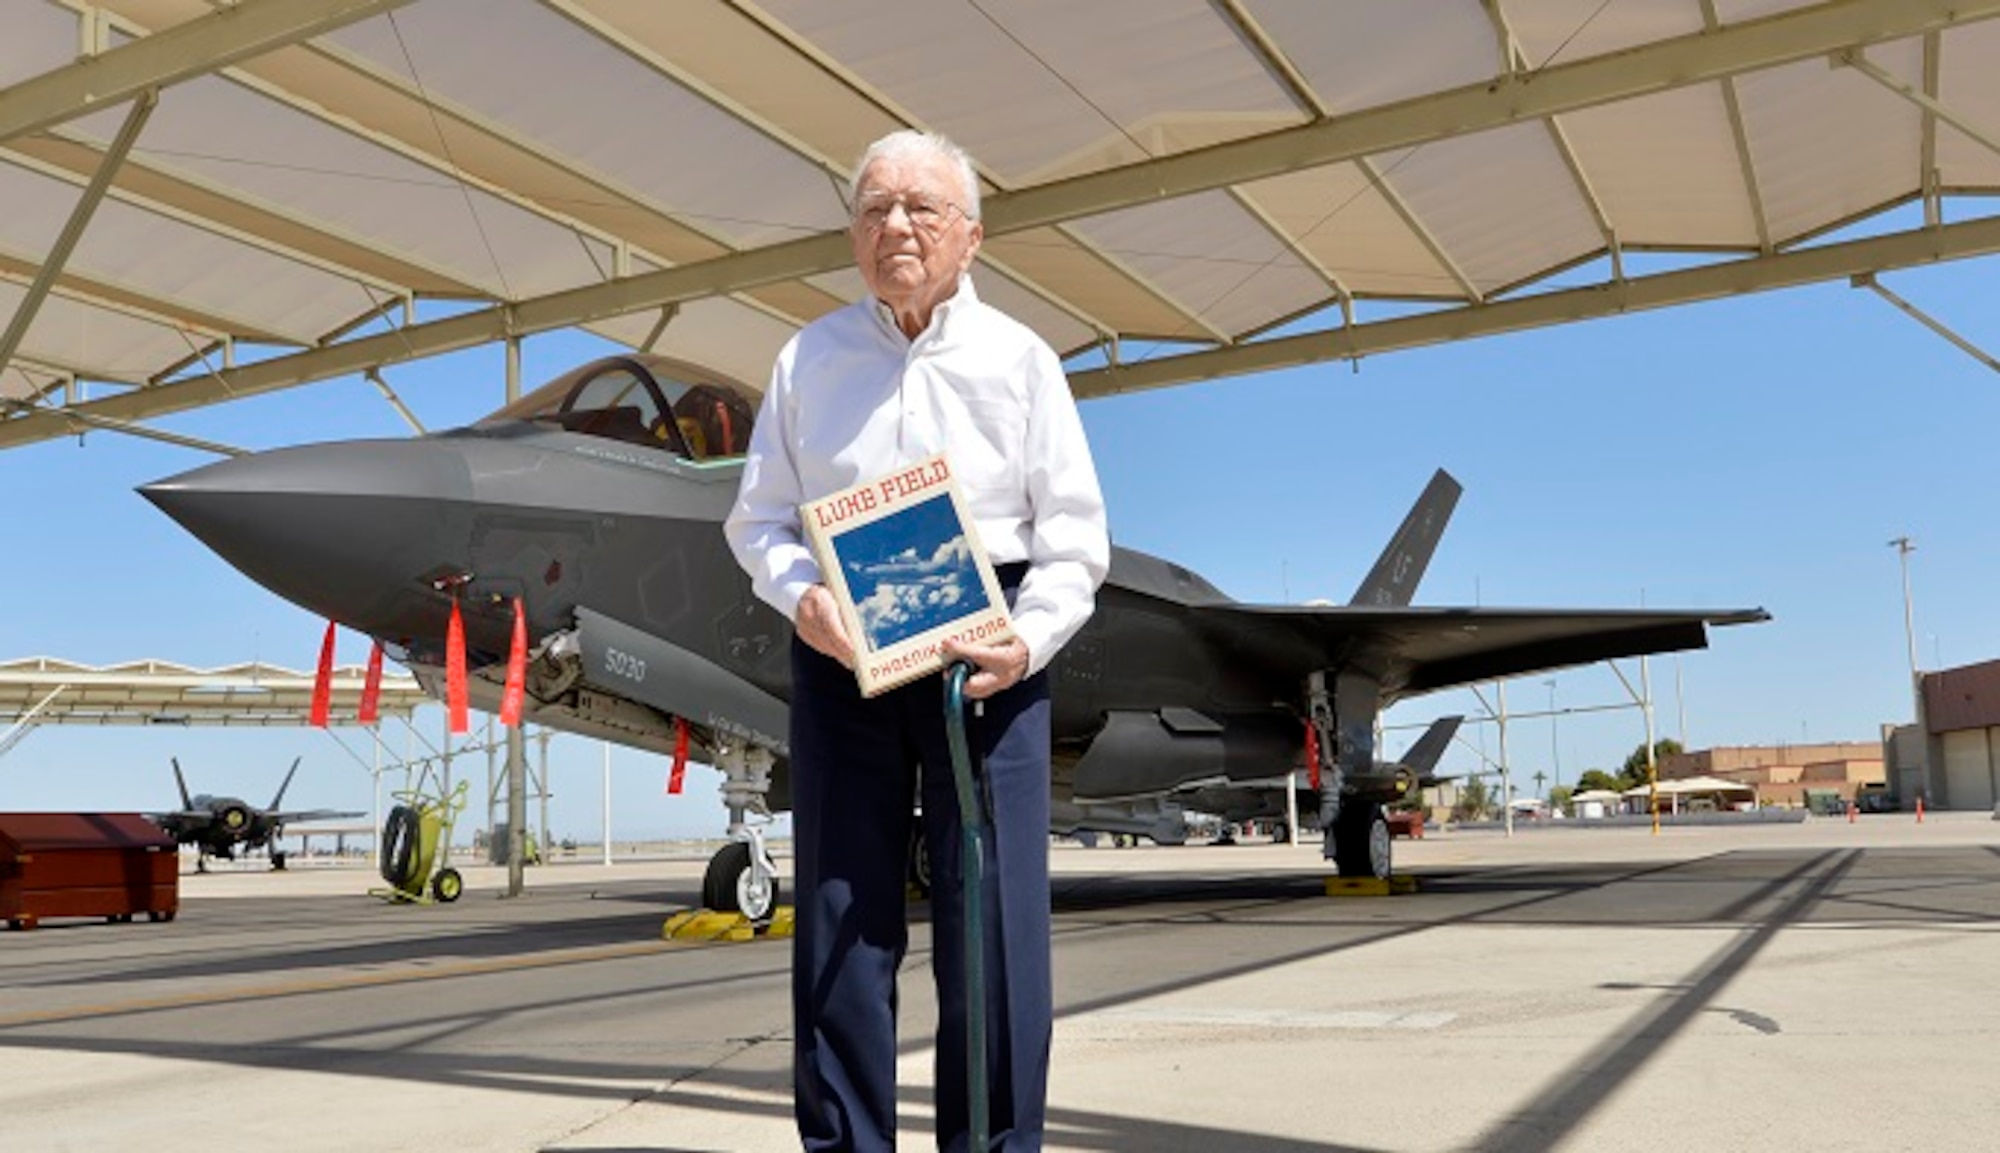 John Marusiak poses for a photo for the Air Force's 2017 Veterans in Blue Series at Luke Air Force Base, Arizona, April 14, 2017. Marusiak enlisted into the Army Air Corps as a pilot and completed a total of 105 missions over Europe during World War II. (U.S. Air Force photo by Staff Sgt. Marcy Copeland)